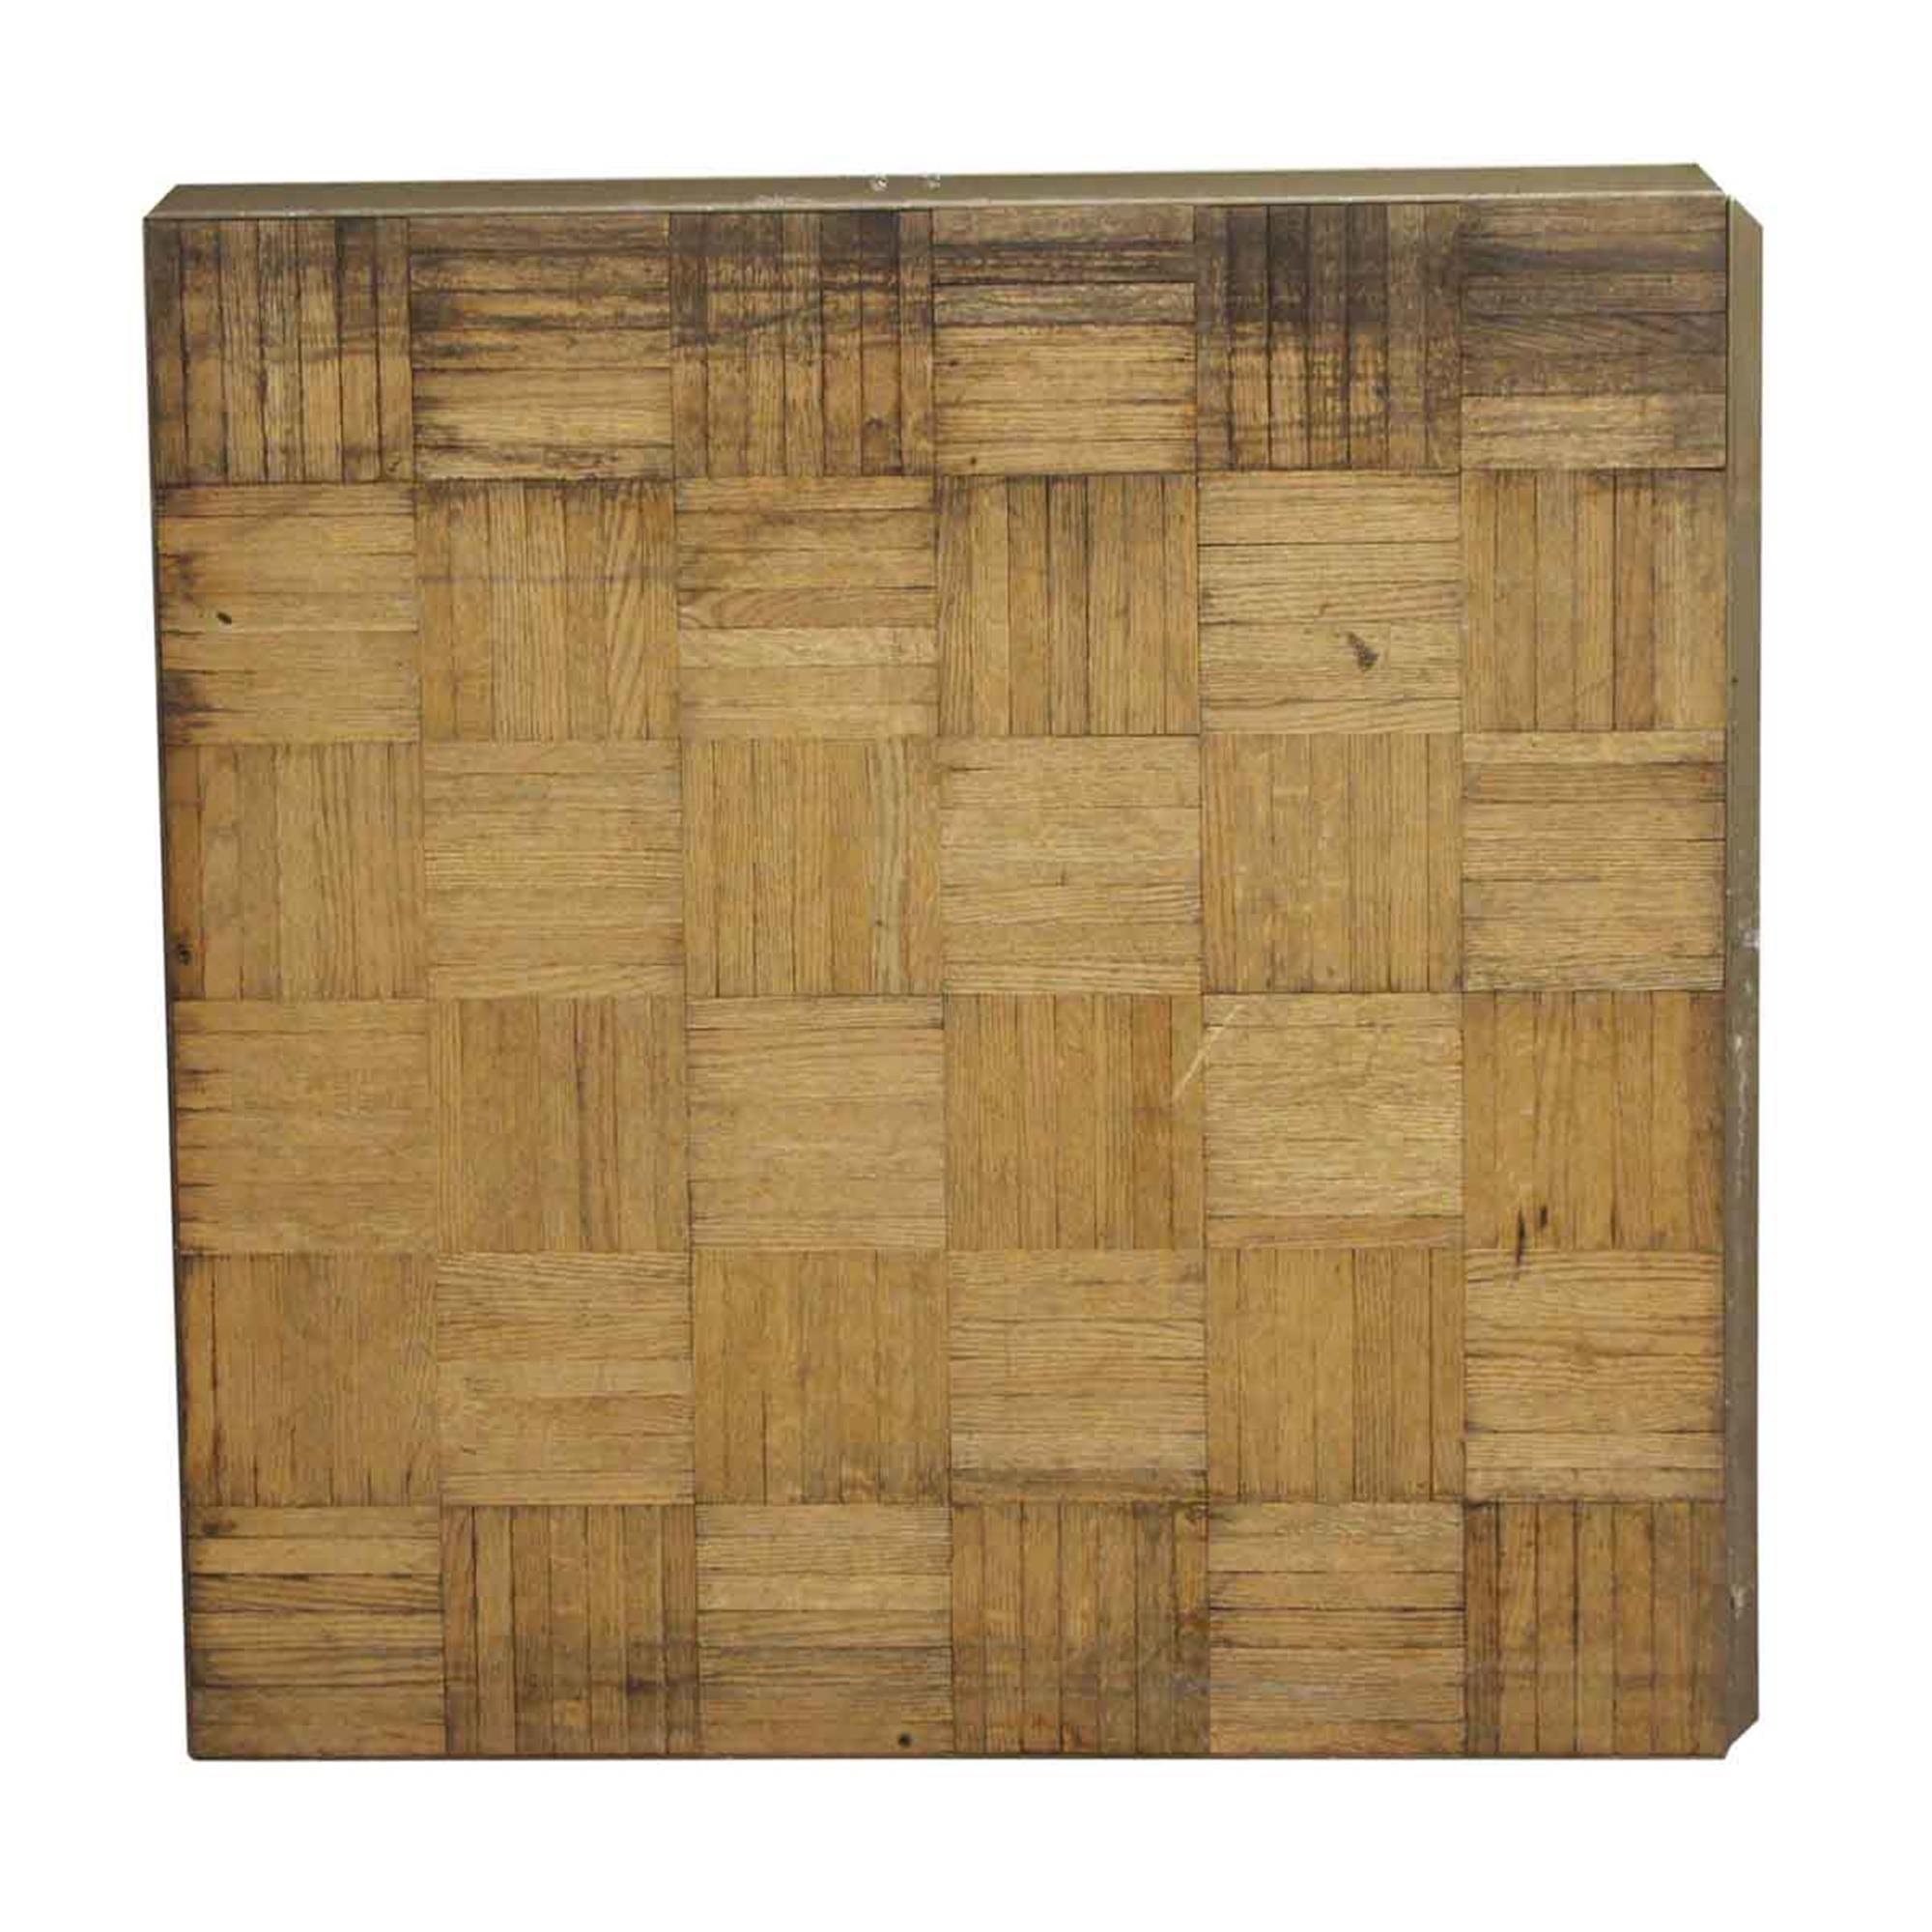 1950s oak parquet dance floor squares with interlocking steel frame for easy setup and removal. The 1/8